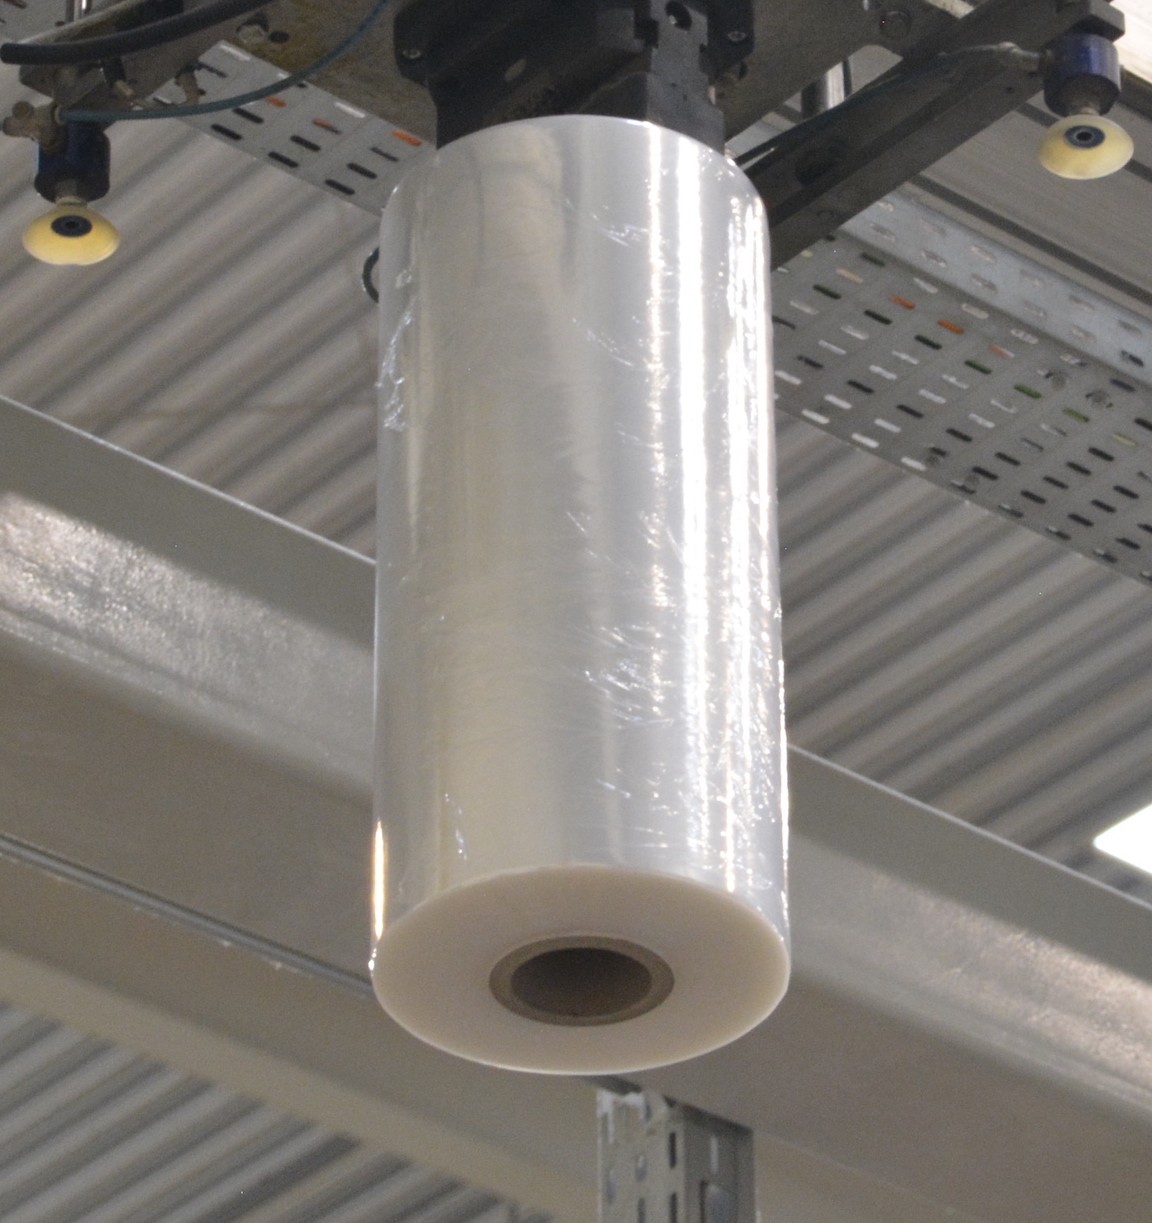 Machine stretch film for pallet wrapping